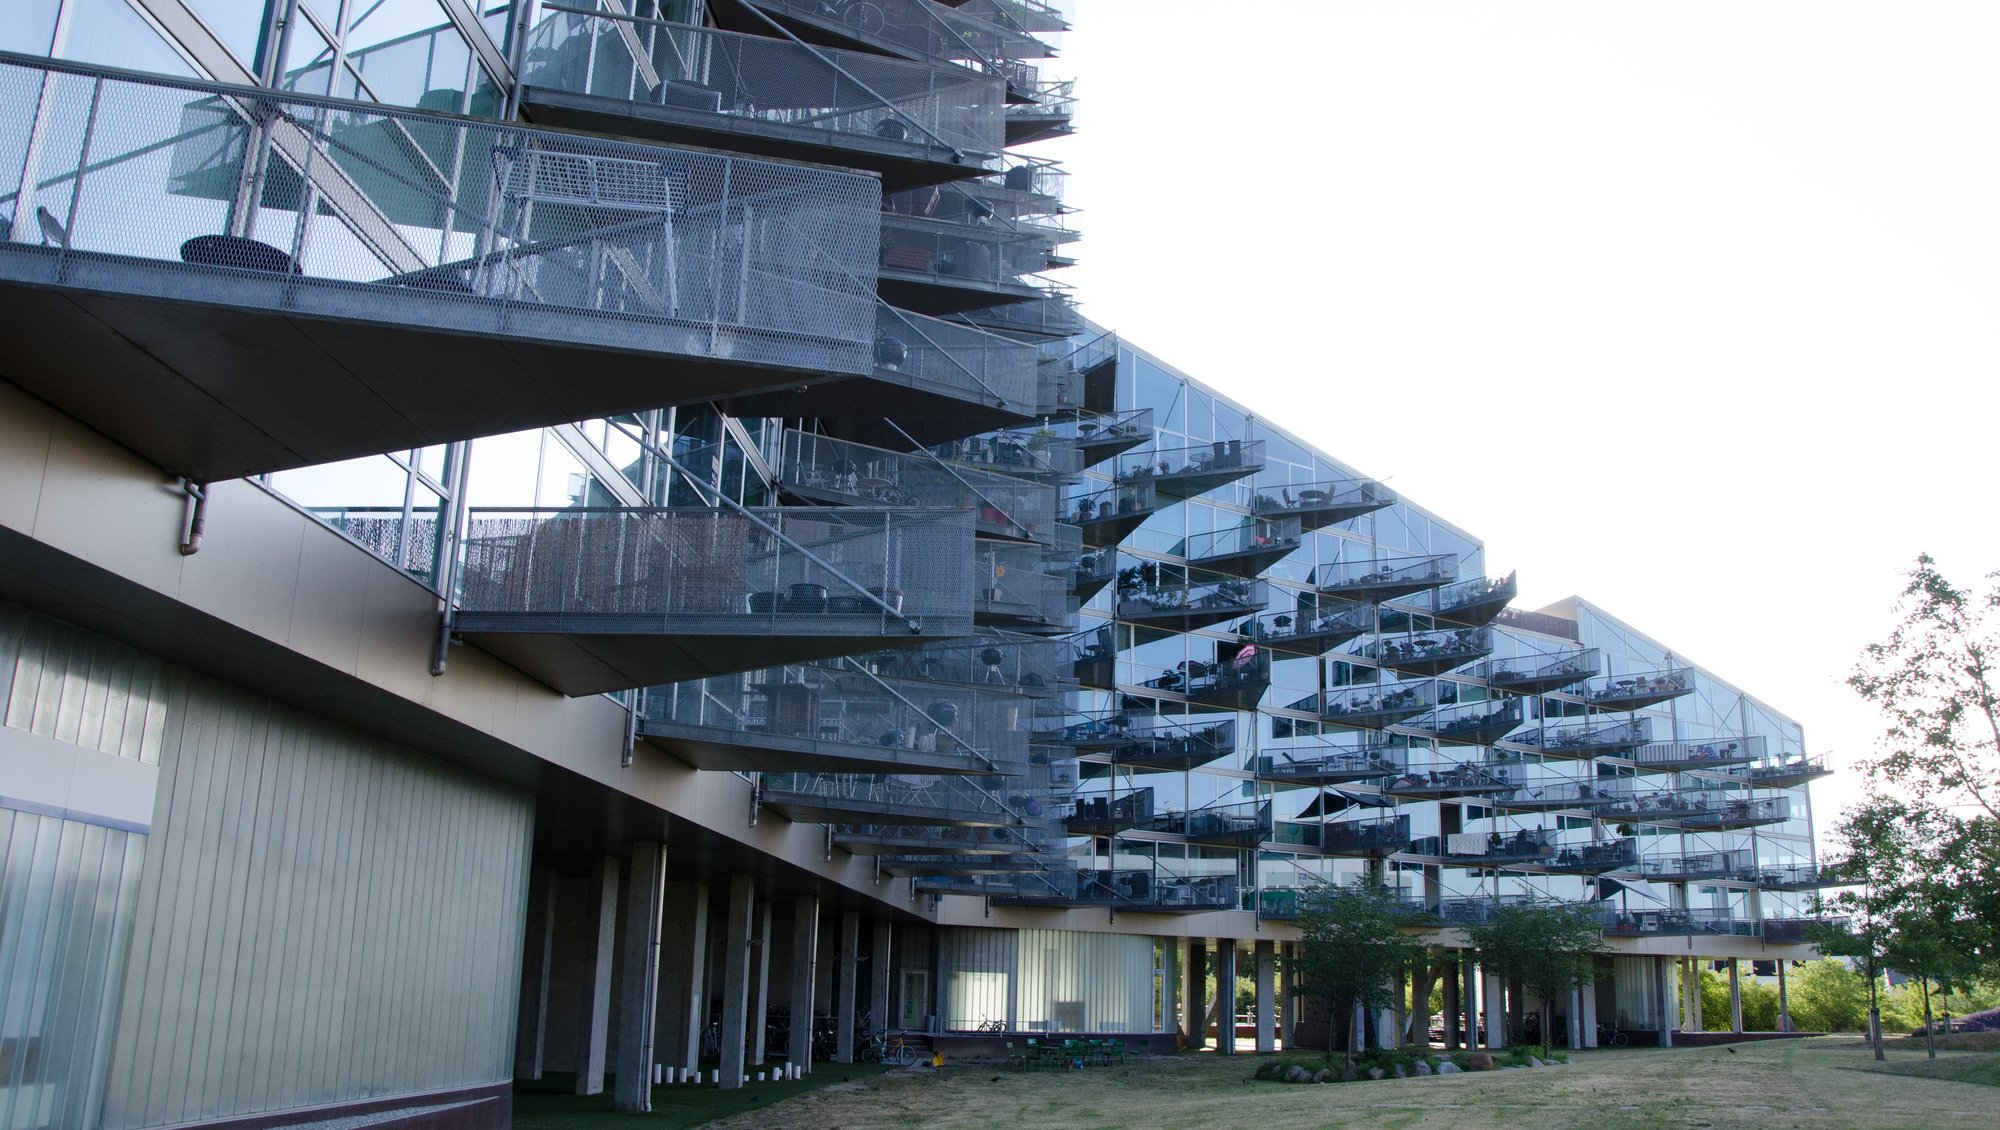 A housing complex made out of glass. What is special about this complex is that the balconies are triangular made by glass aswell. From far away, the balconies together look like spikes.